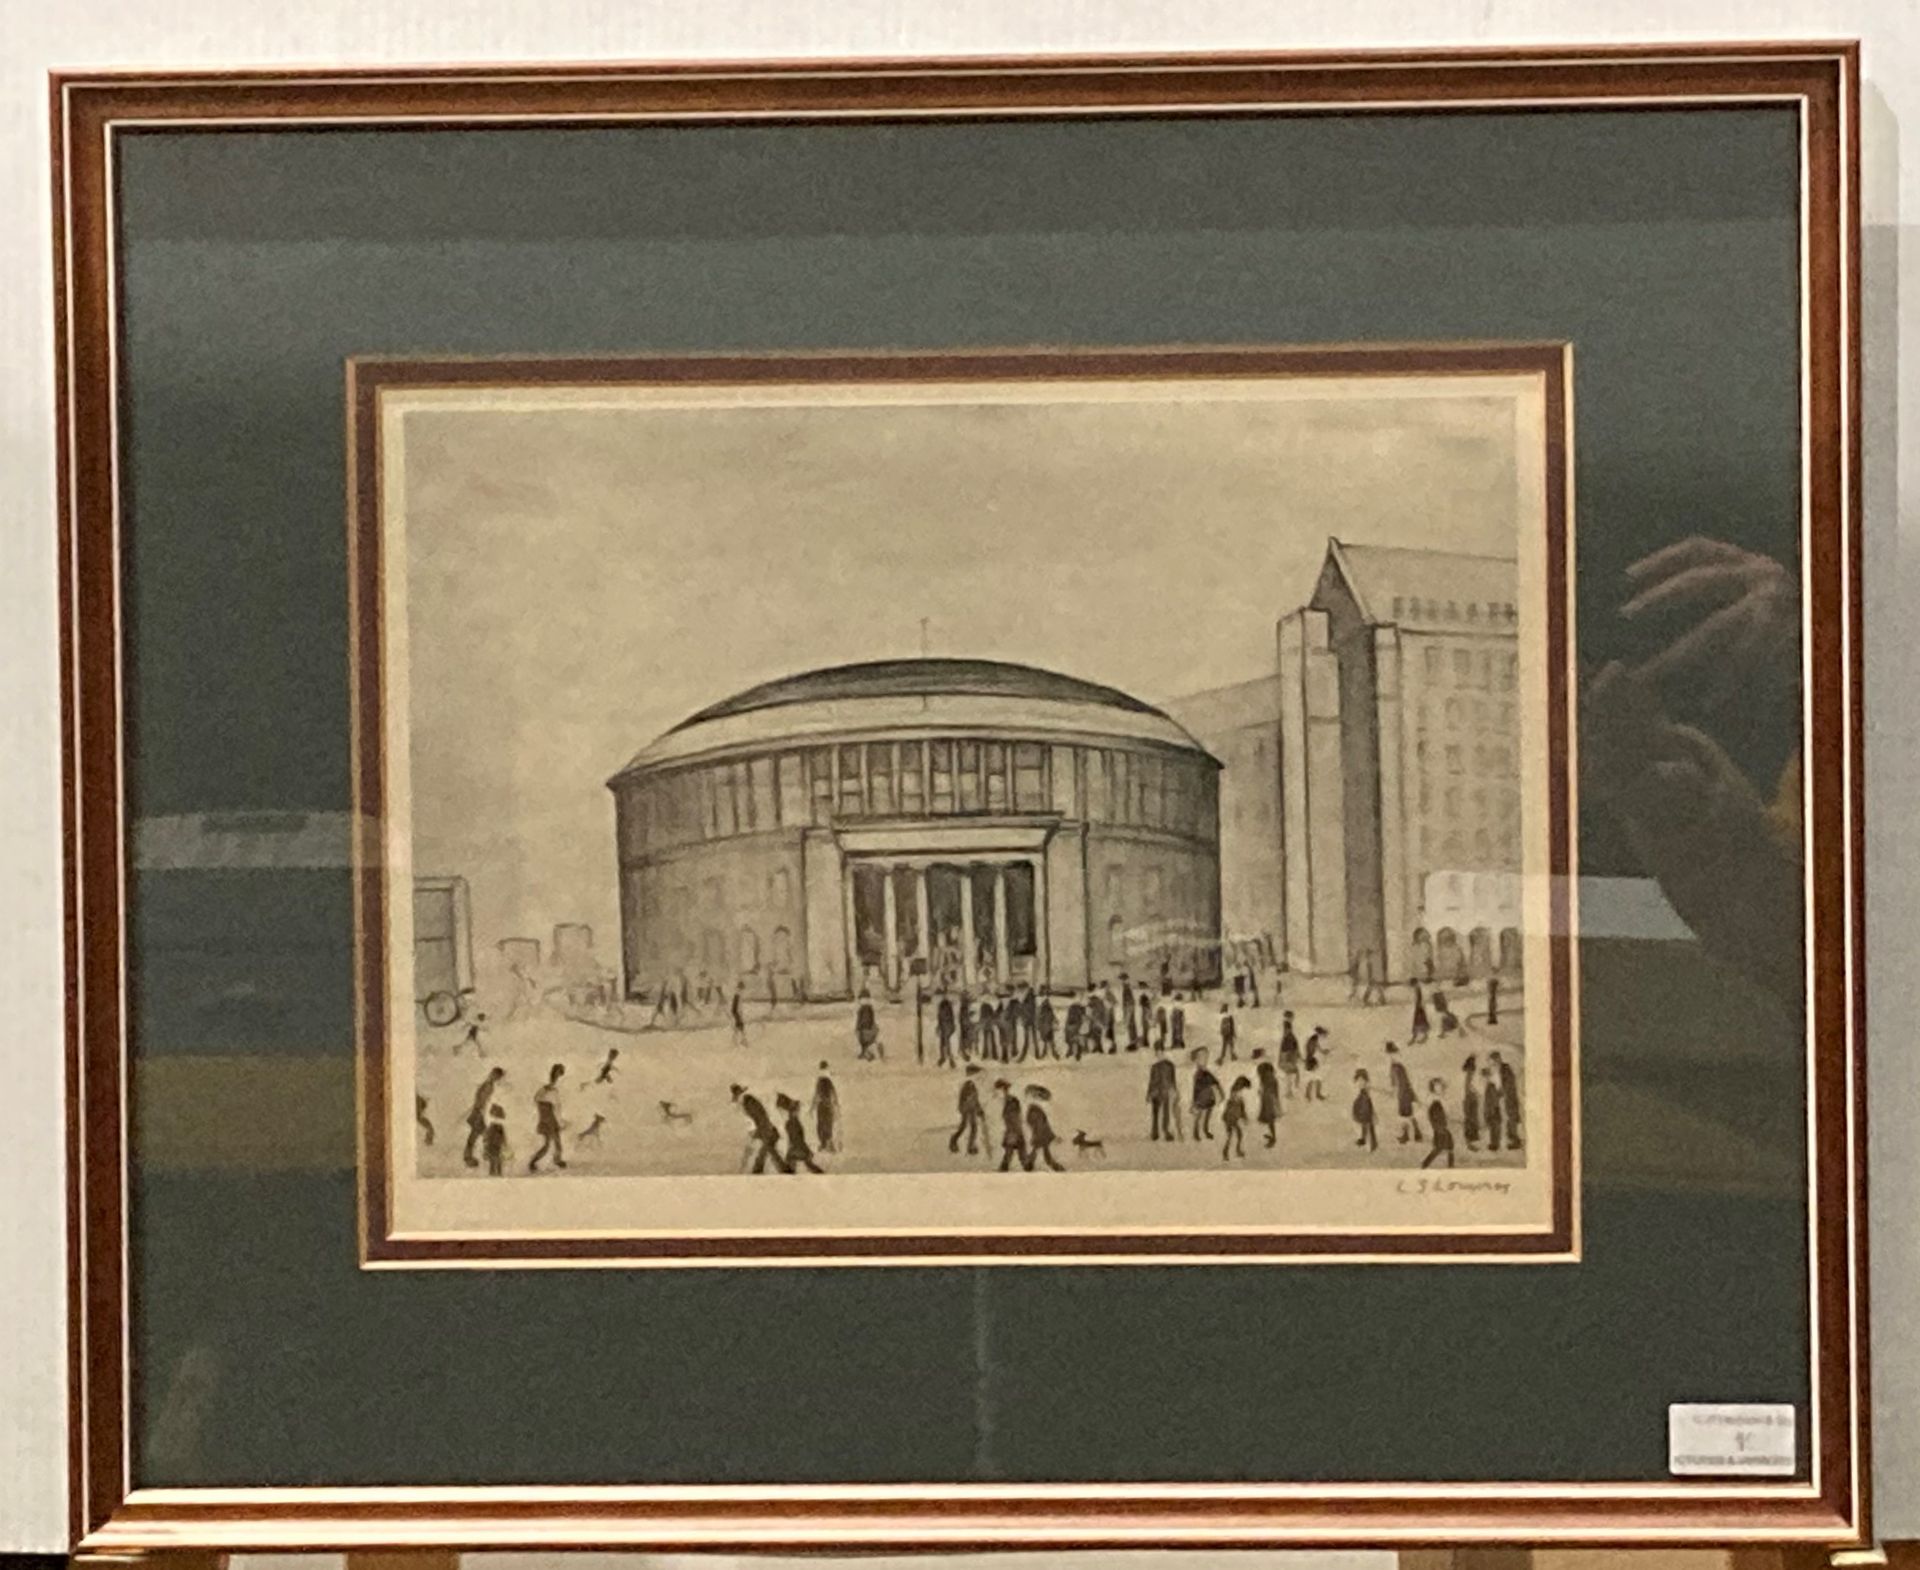 † L S Lowry (1887-1975), 'Reference Library', lithograph on paper, signed in pencil,